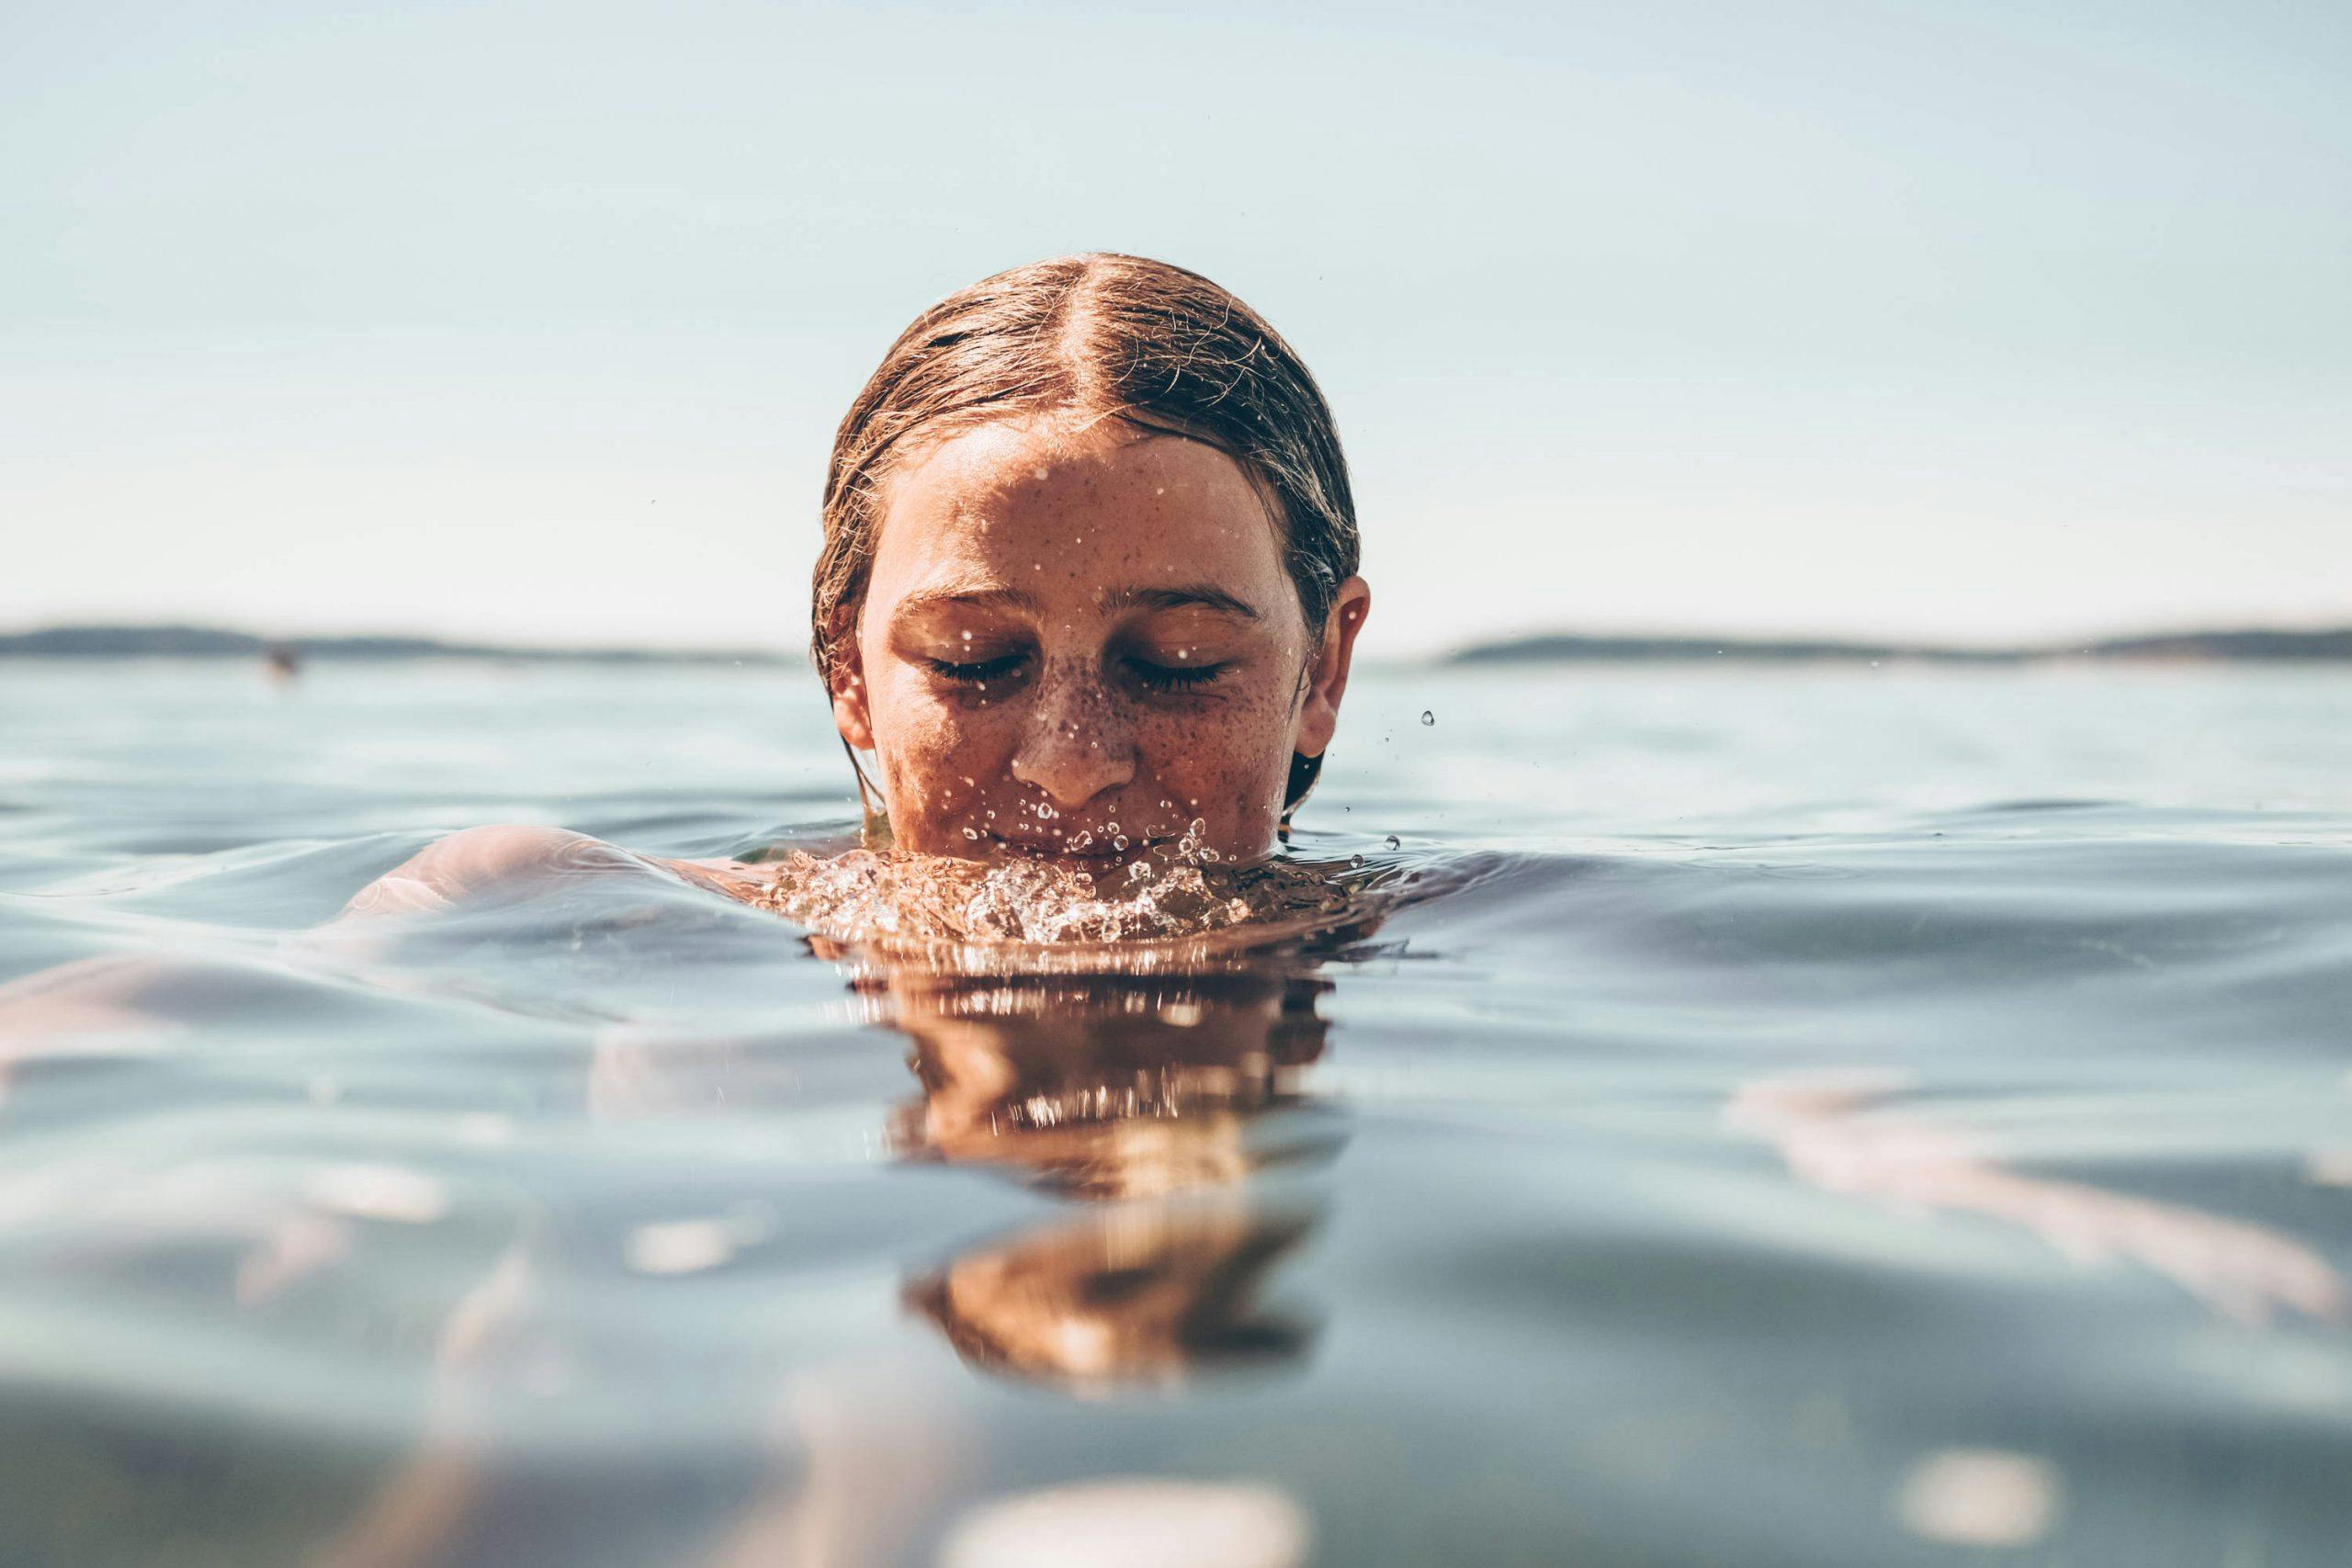 Swimming Your Way to Self-Care